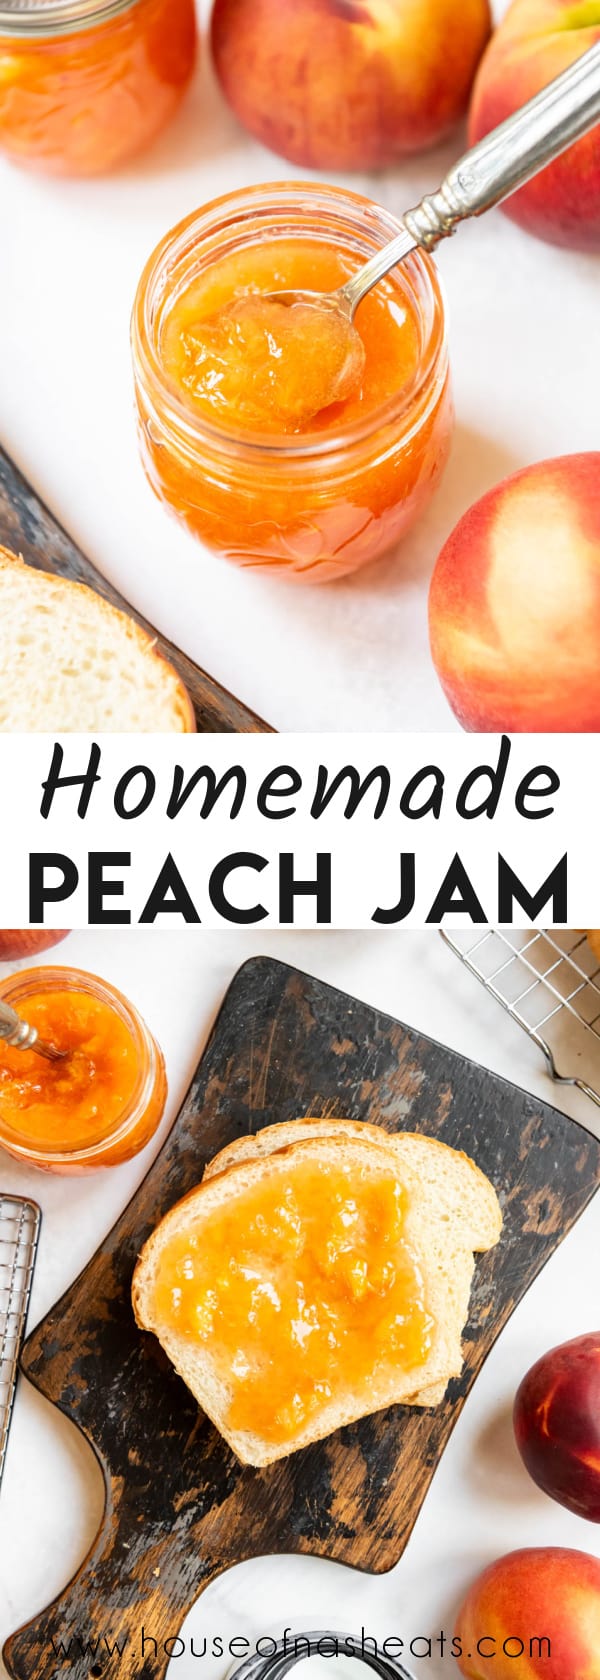 A collage of images of peach jam with text overlay.